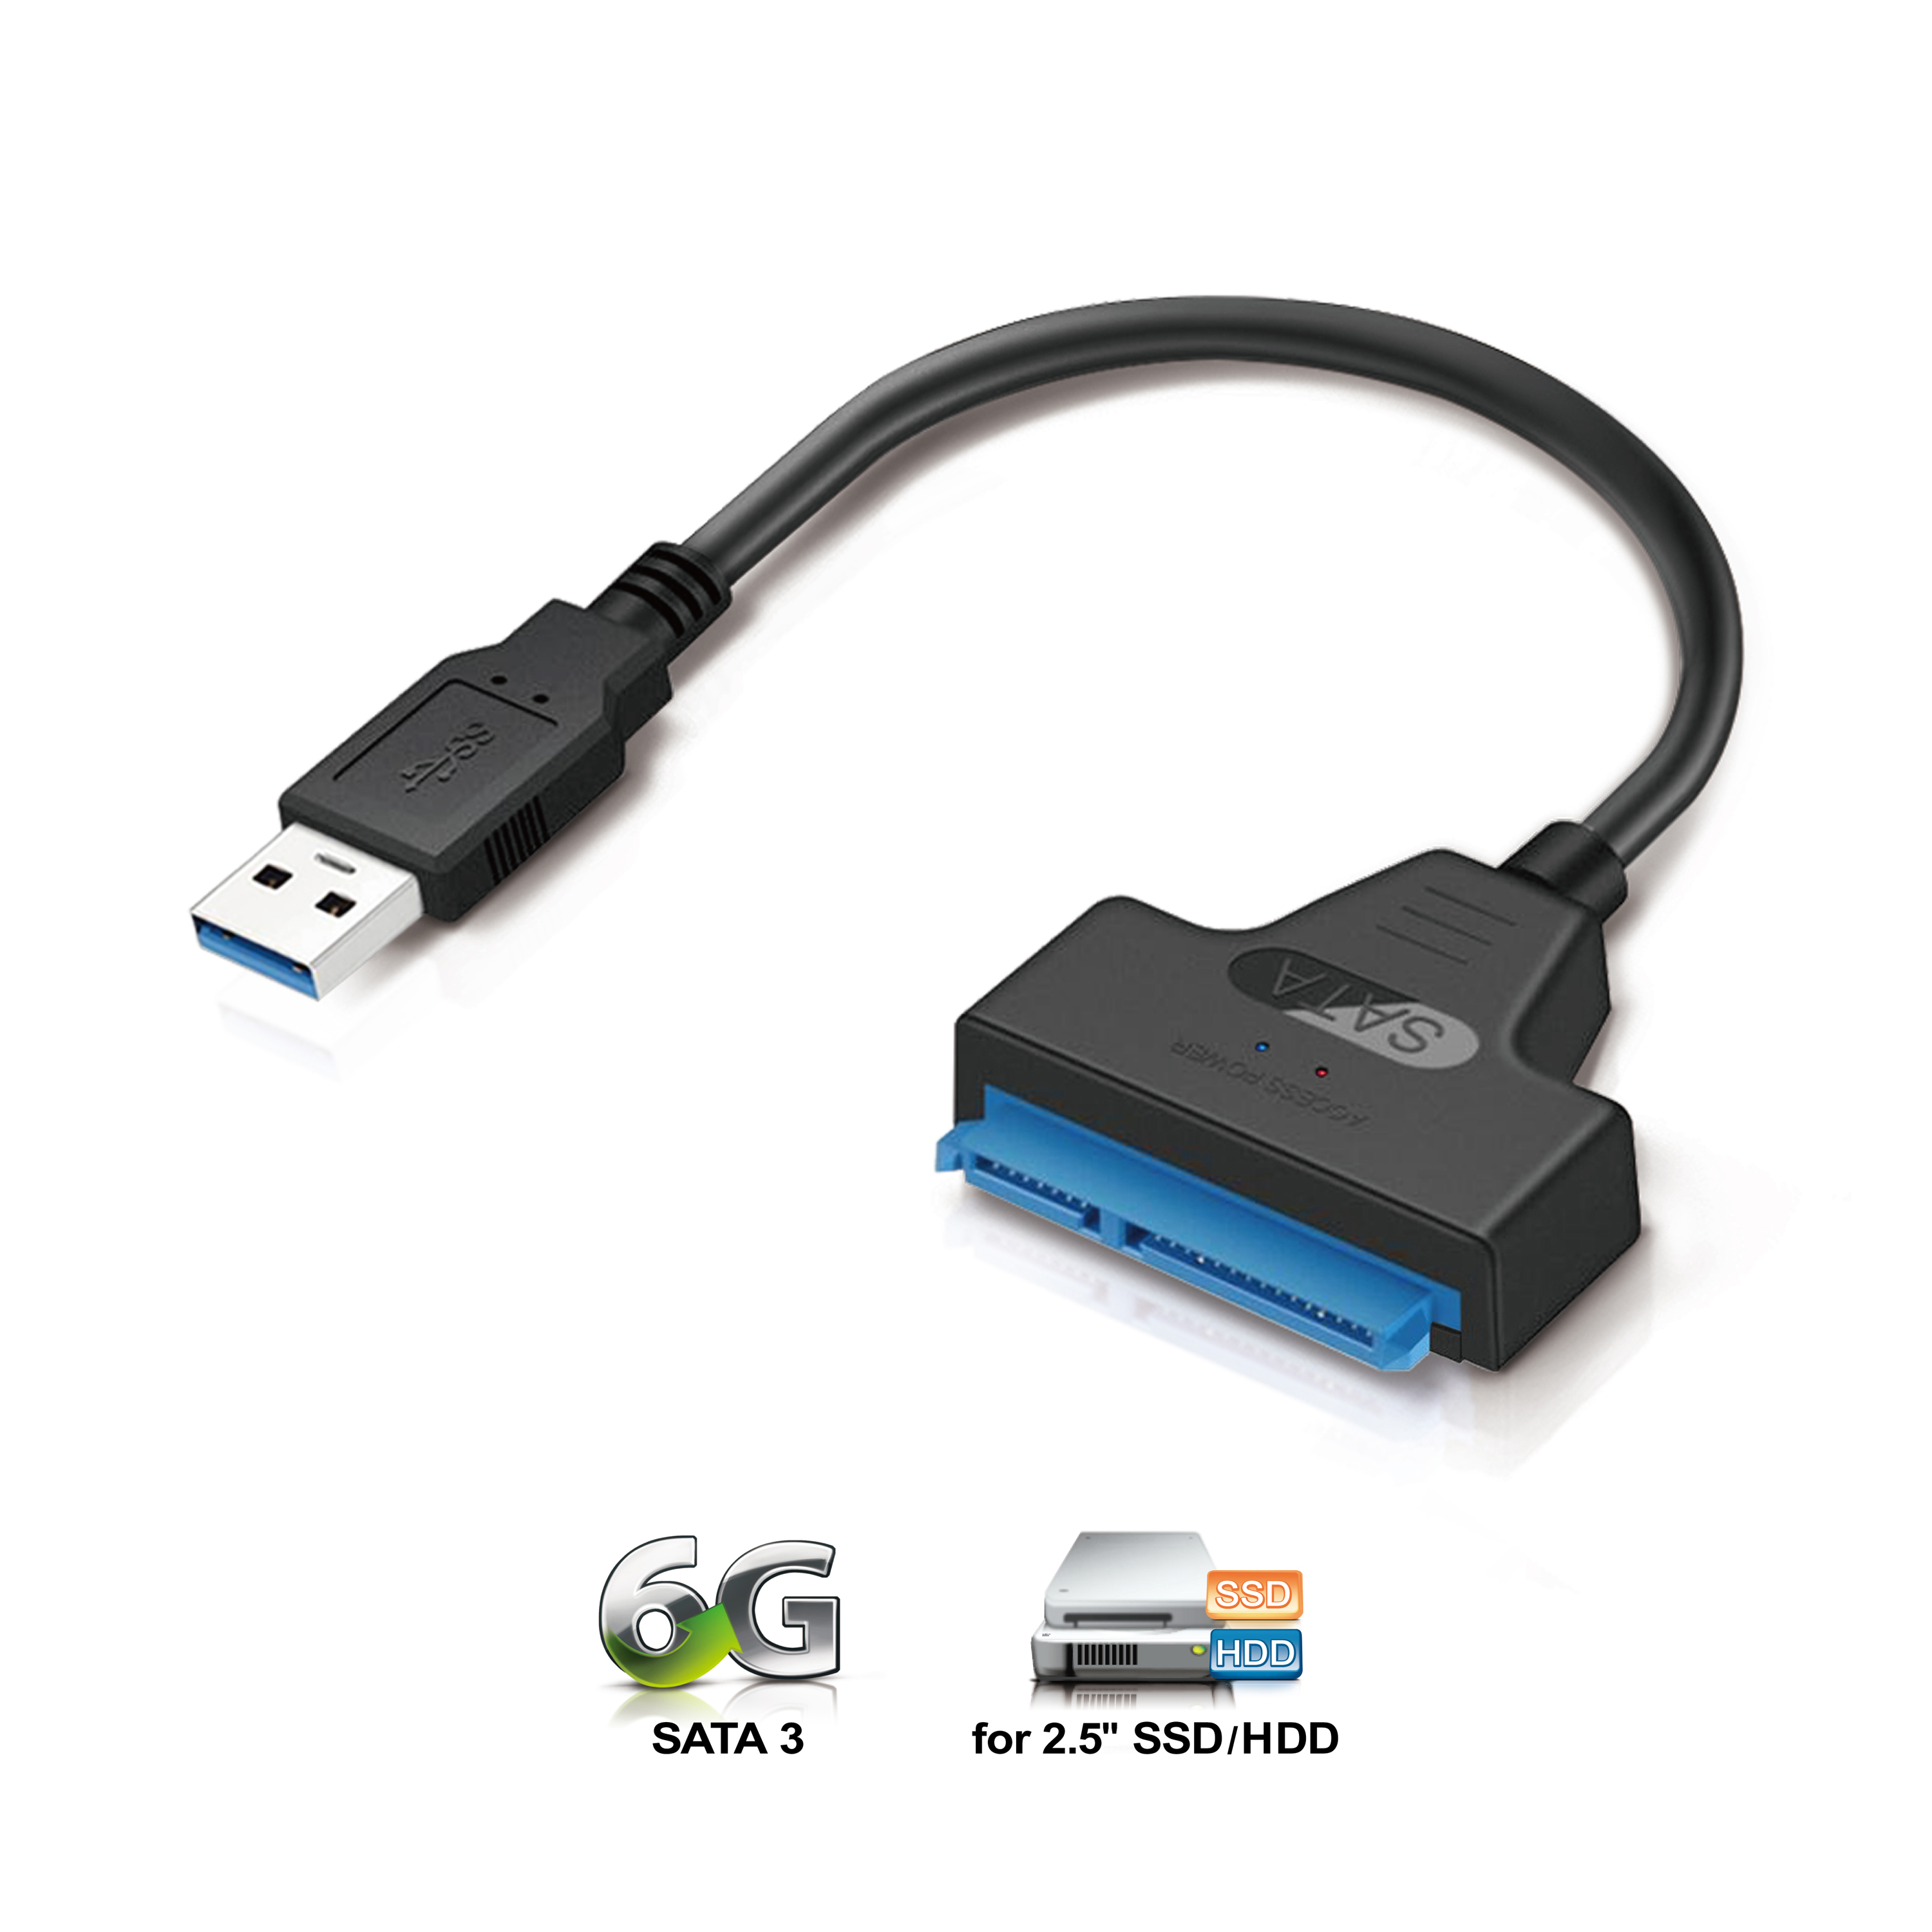 Mediasonic SATA to USB Cable – USB 3.0 / USB 3.1 Gen 1 to 2.5” SATA SSD / Hard Drive Adapter Cable (Optimized for SSD, Support UASP and SATA 3 6.0Gbps transfer rate) (HND5-SU3) - image 1 of 6